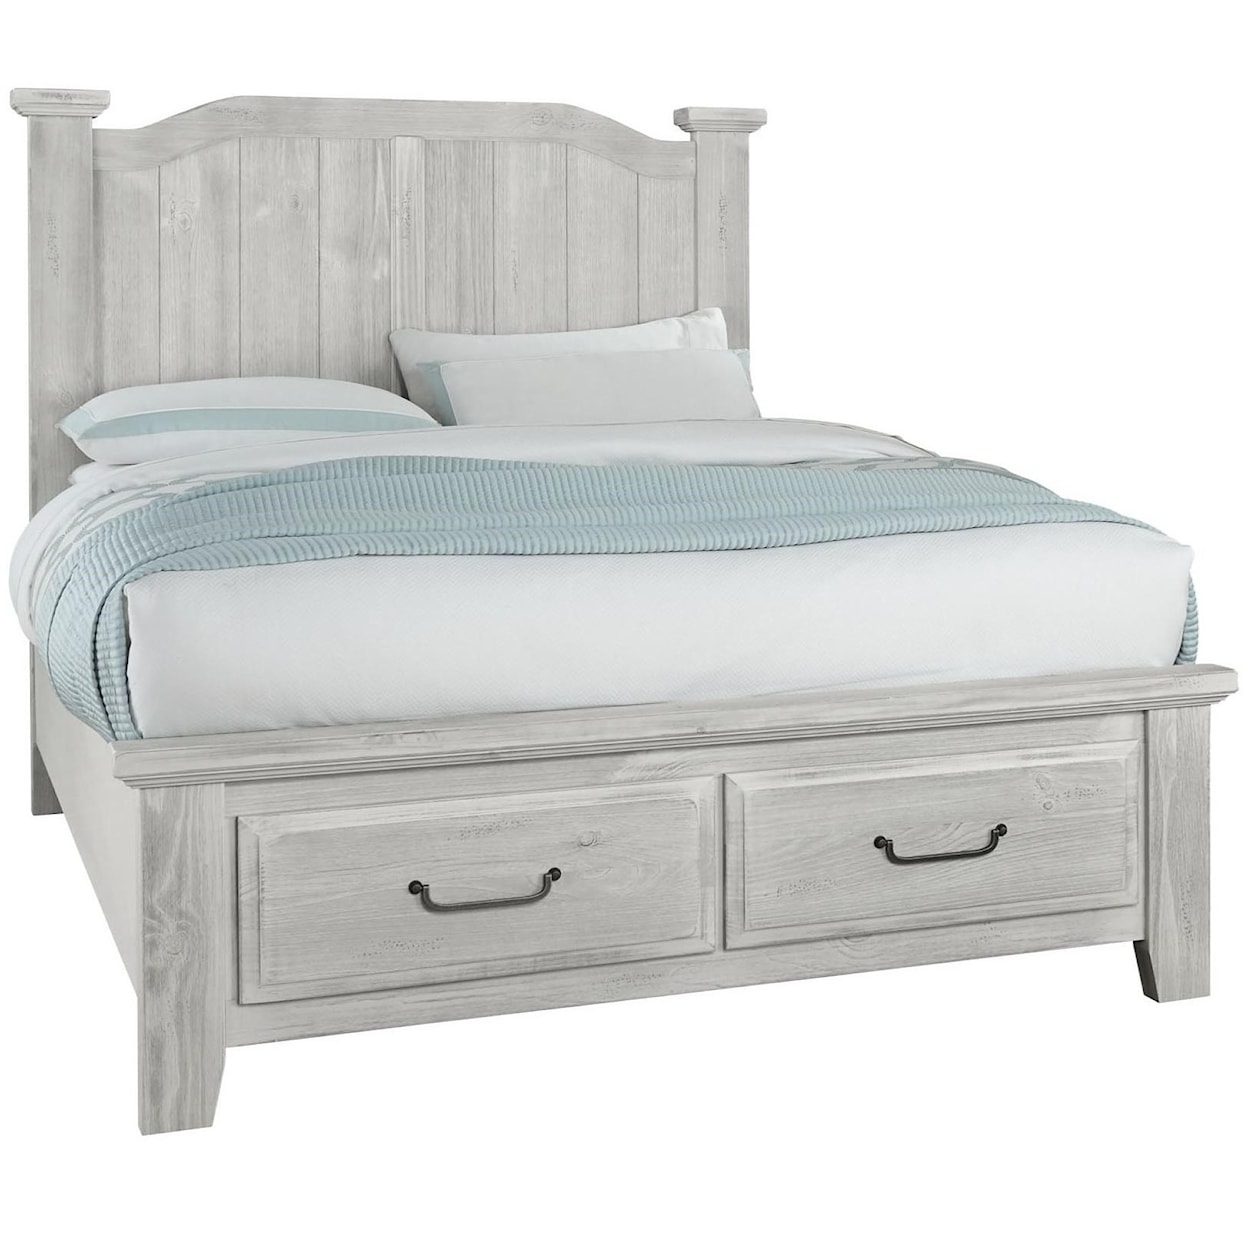 Vaughan Bassett Sawmill Queen Arch Bed With Storage Footboard